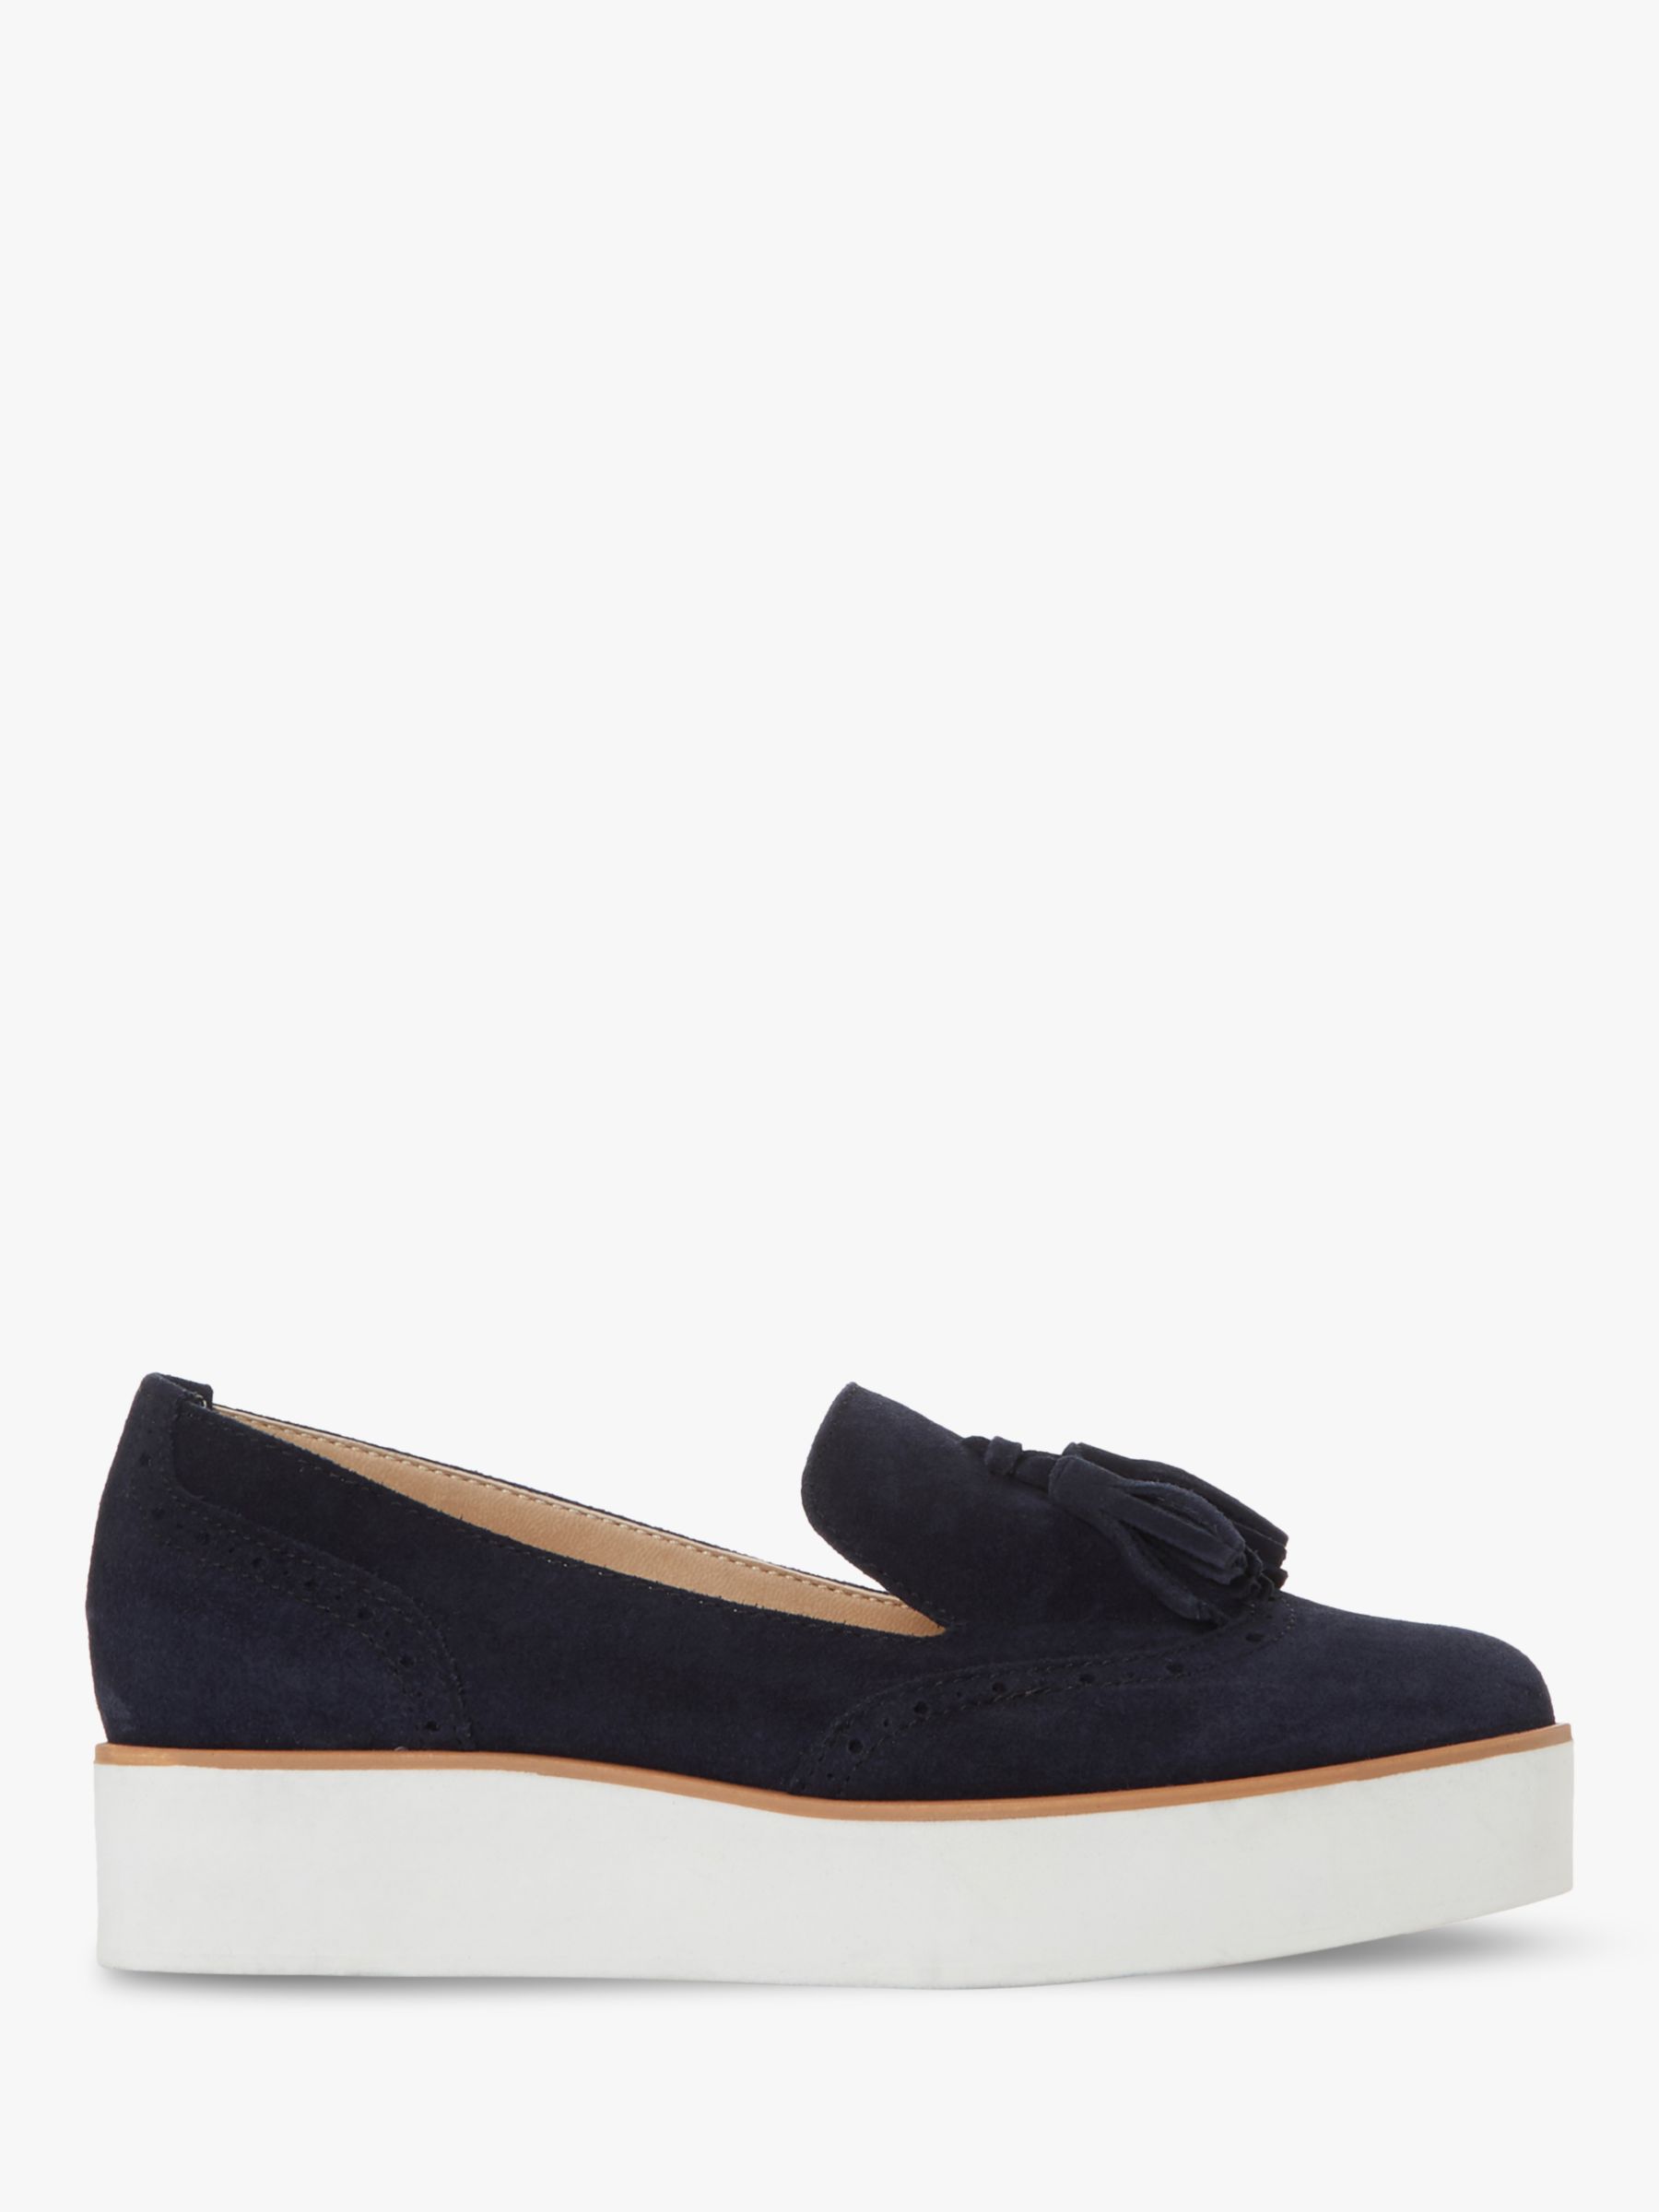 Dune Game Suede Slip On Loafers, Navy